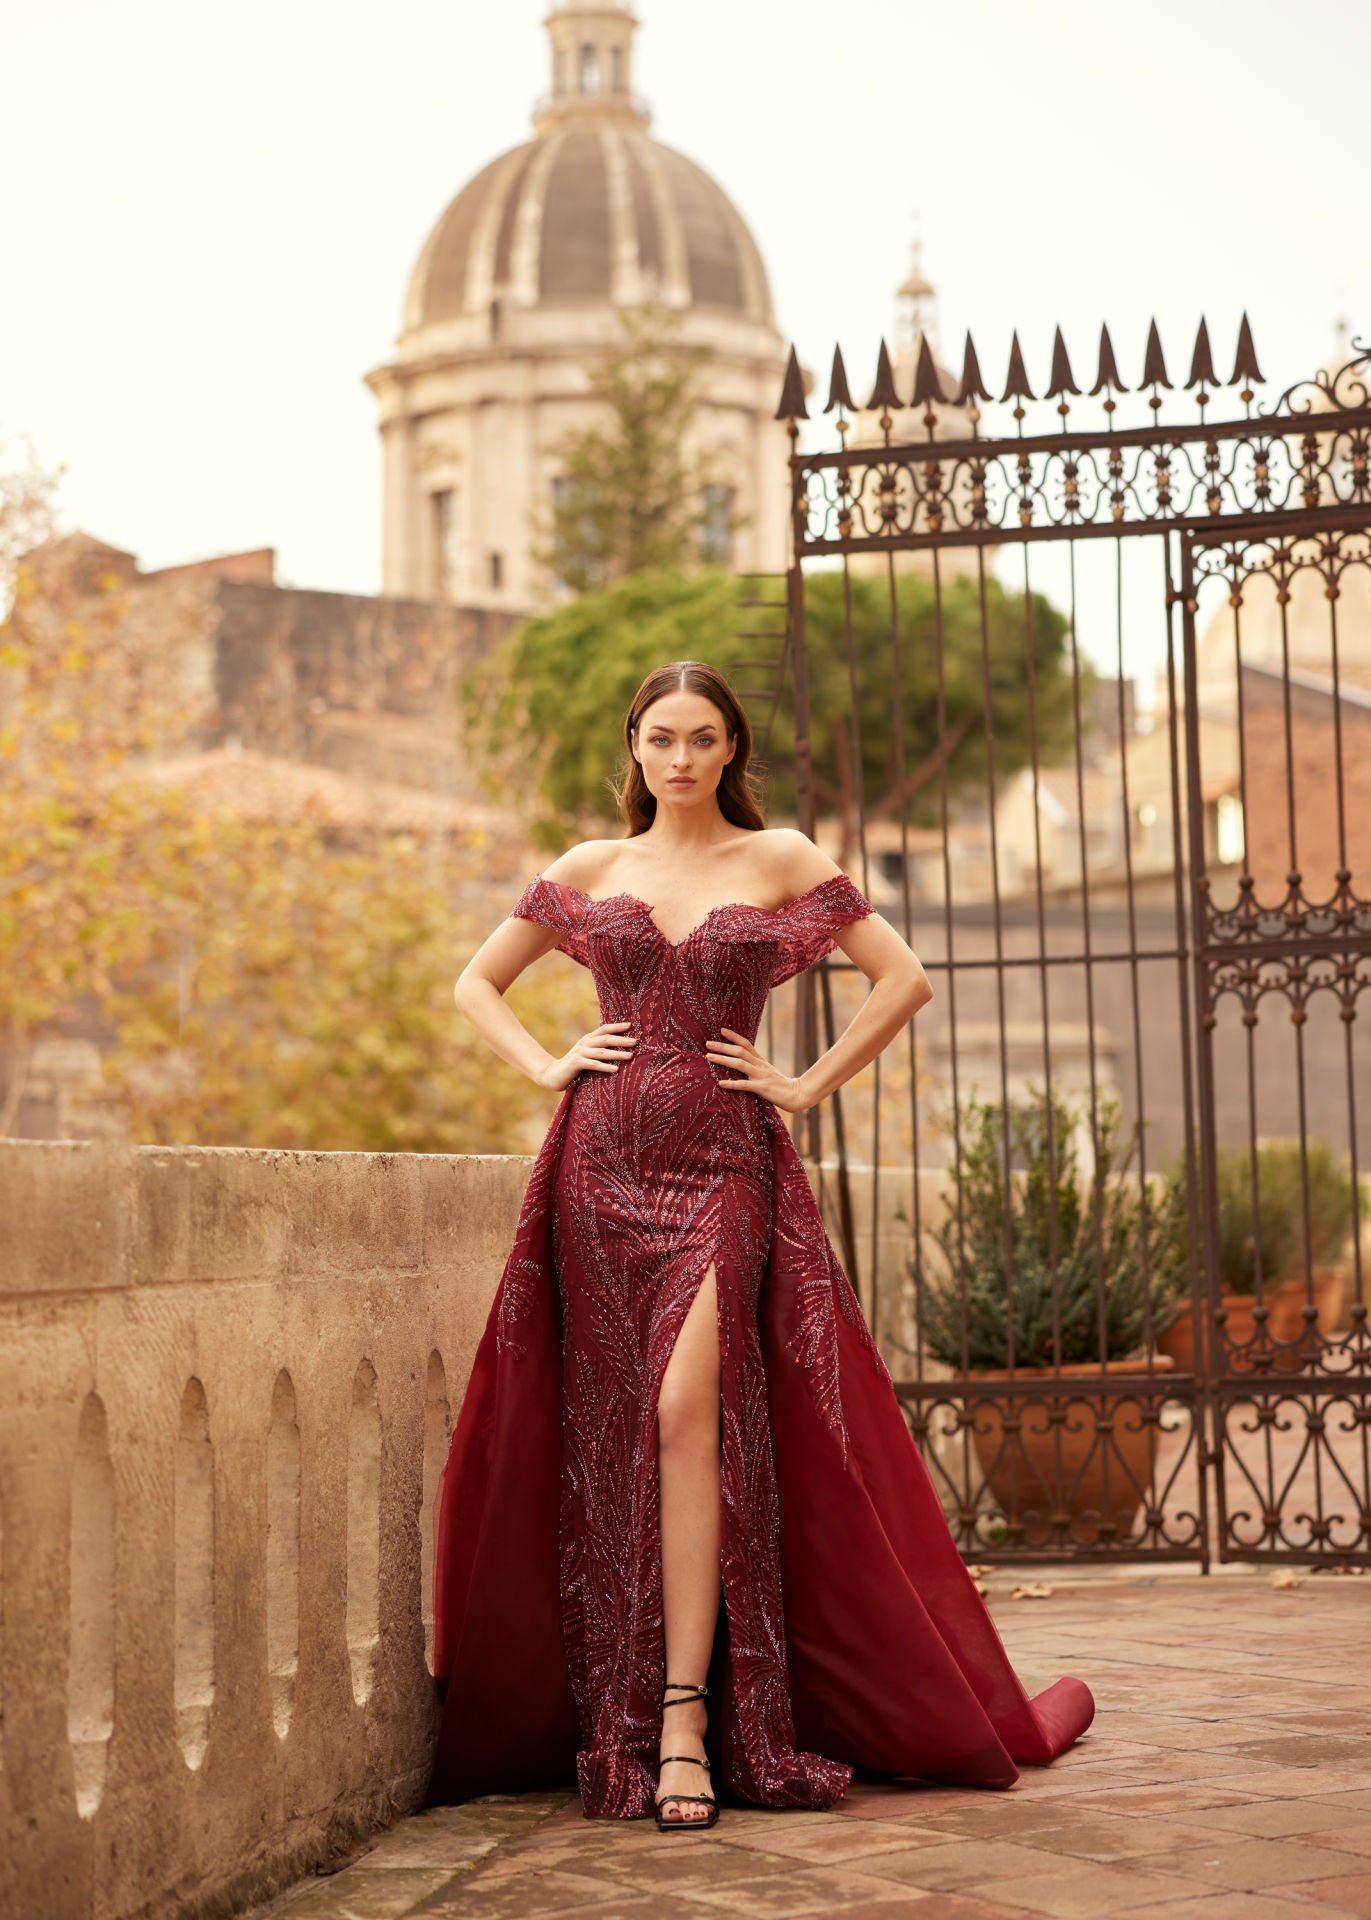 Mermaid Evening Dress Model with Princess Collar, Side Sleeve Detail, Embroidered Lace, Frock, Slit